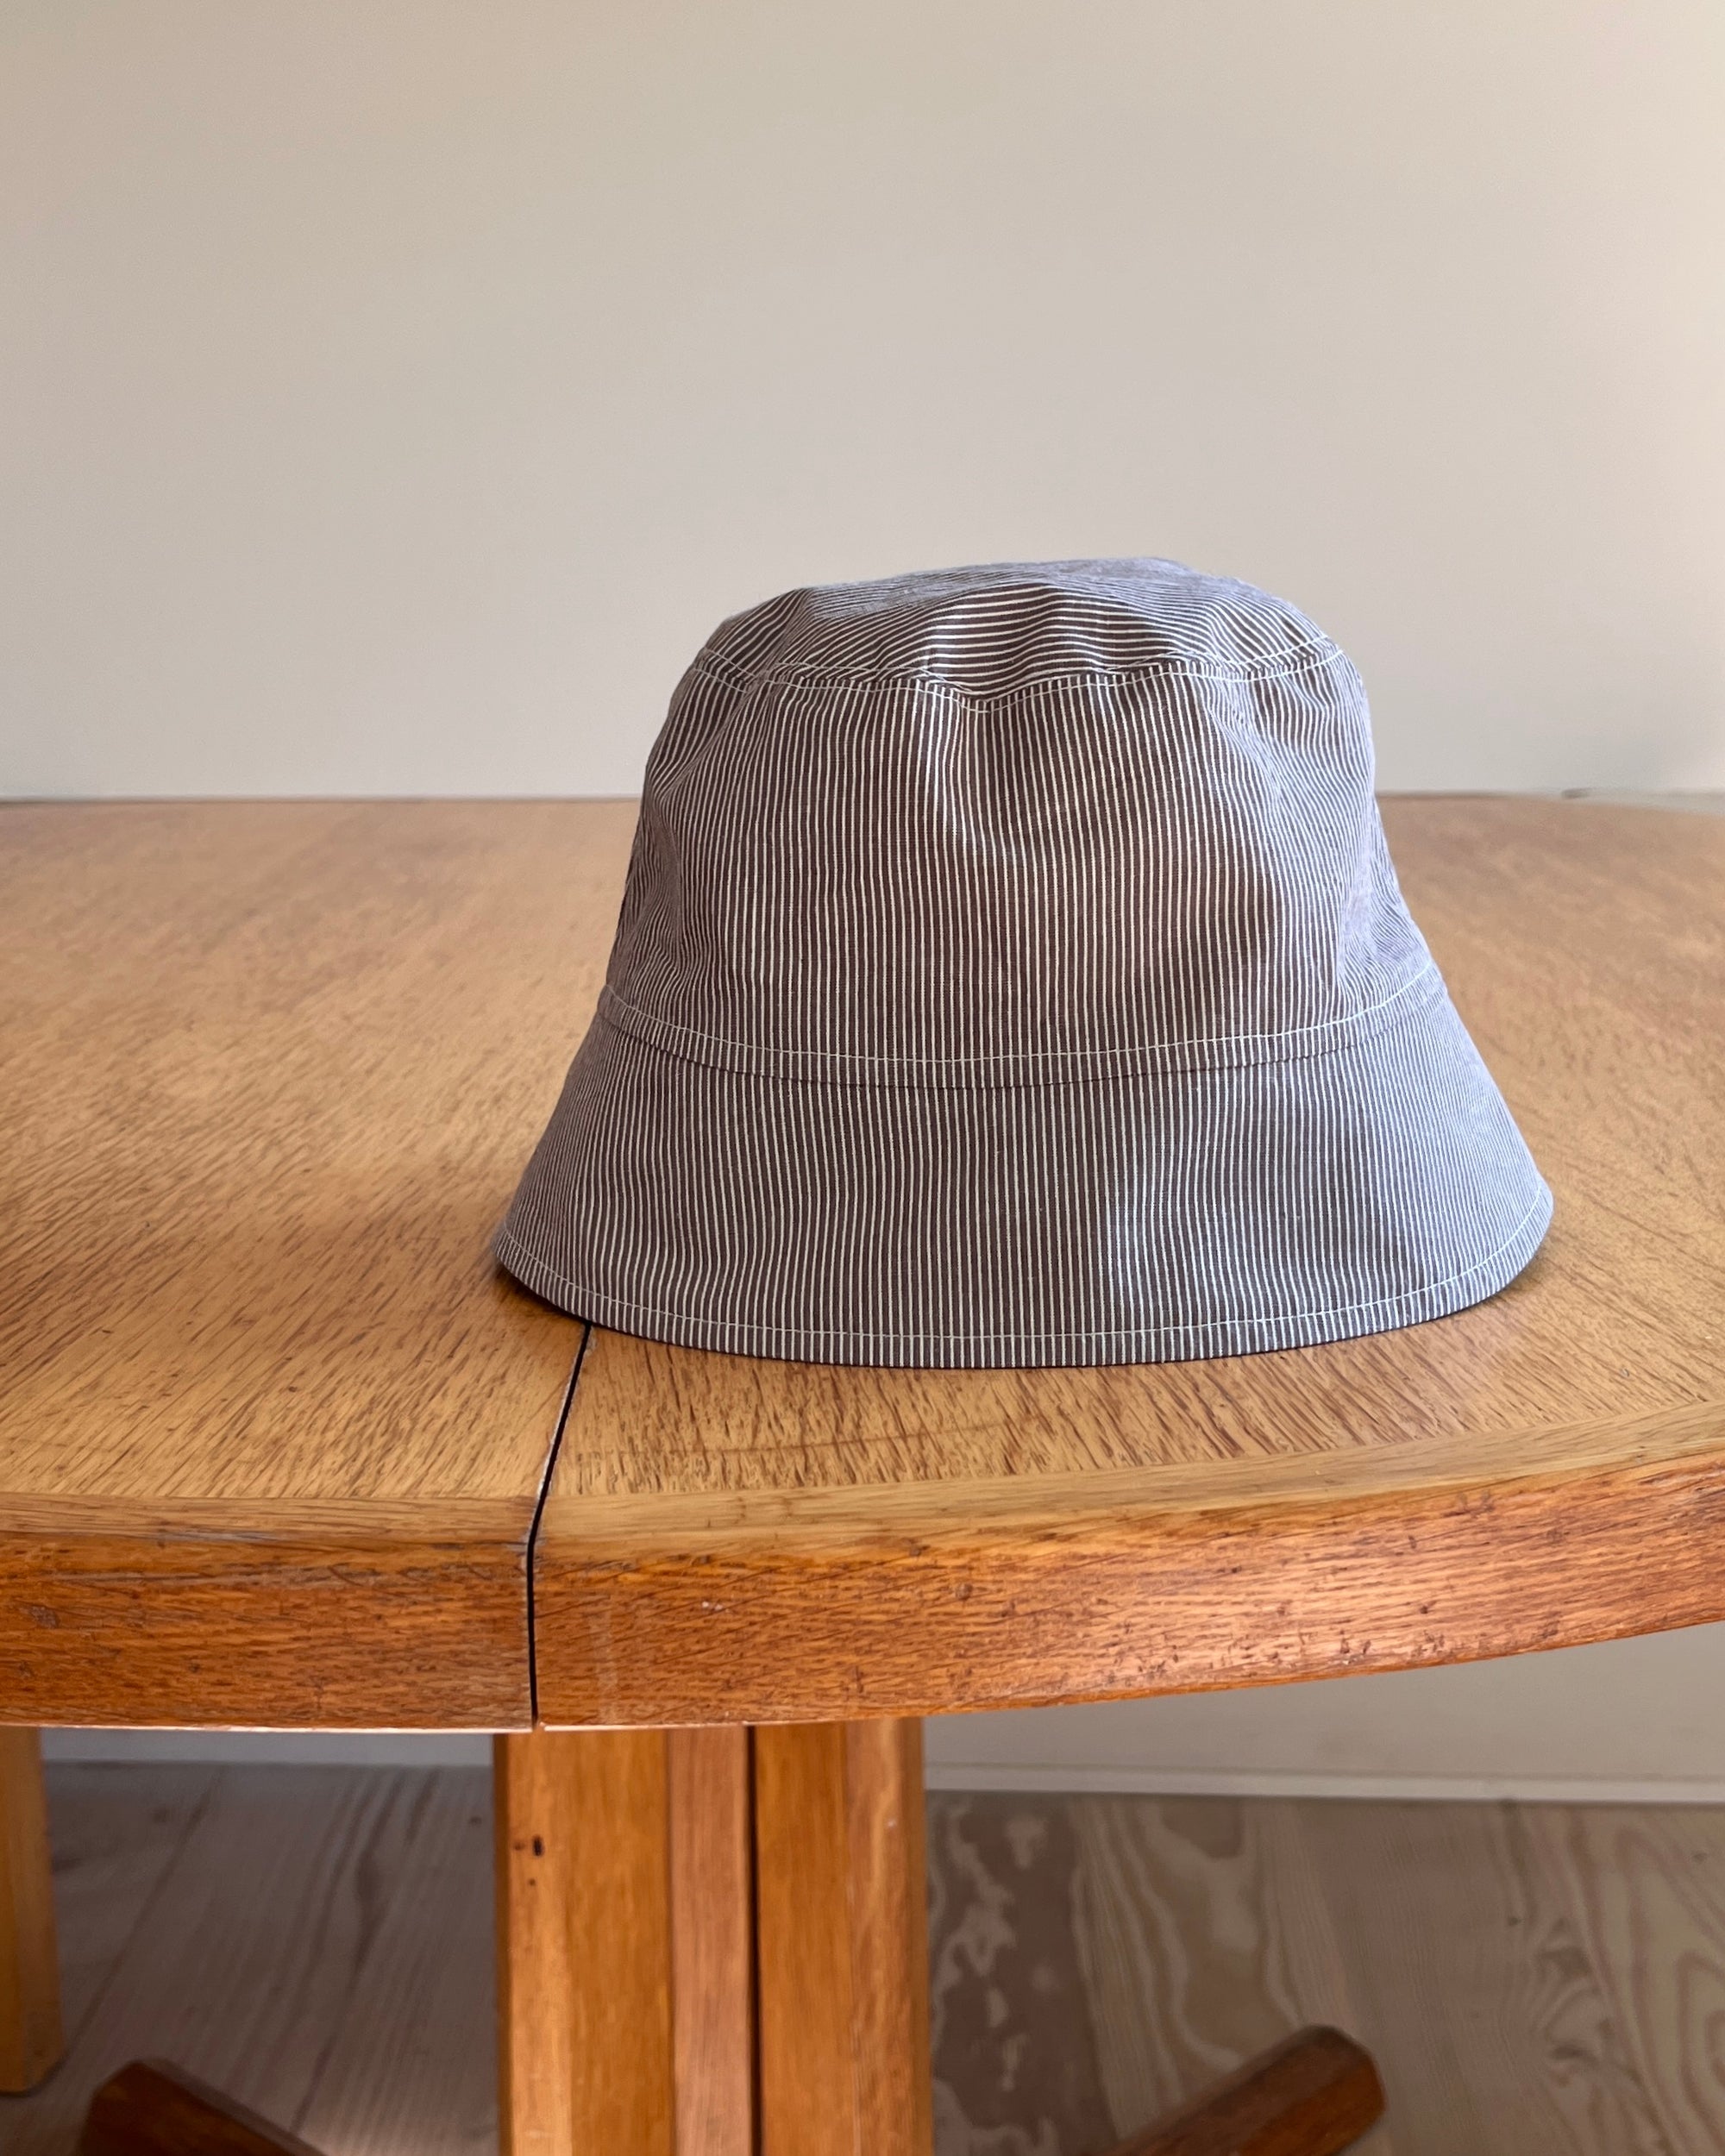 Sewing Project No. 02: Favorite Pants Mini + Bucket Hat